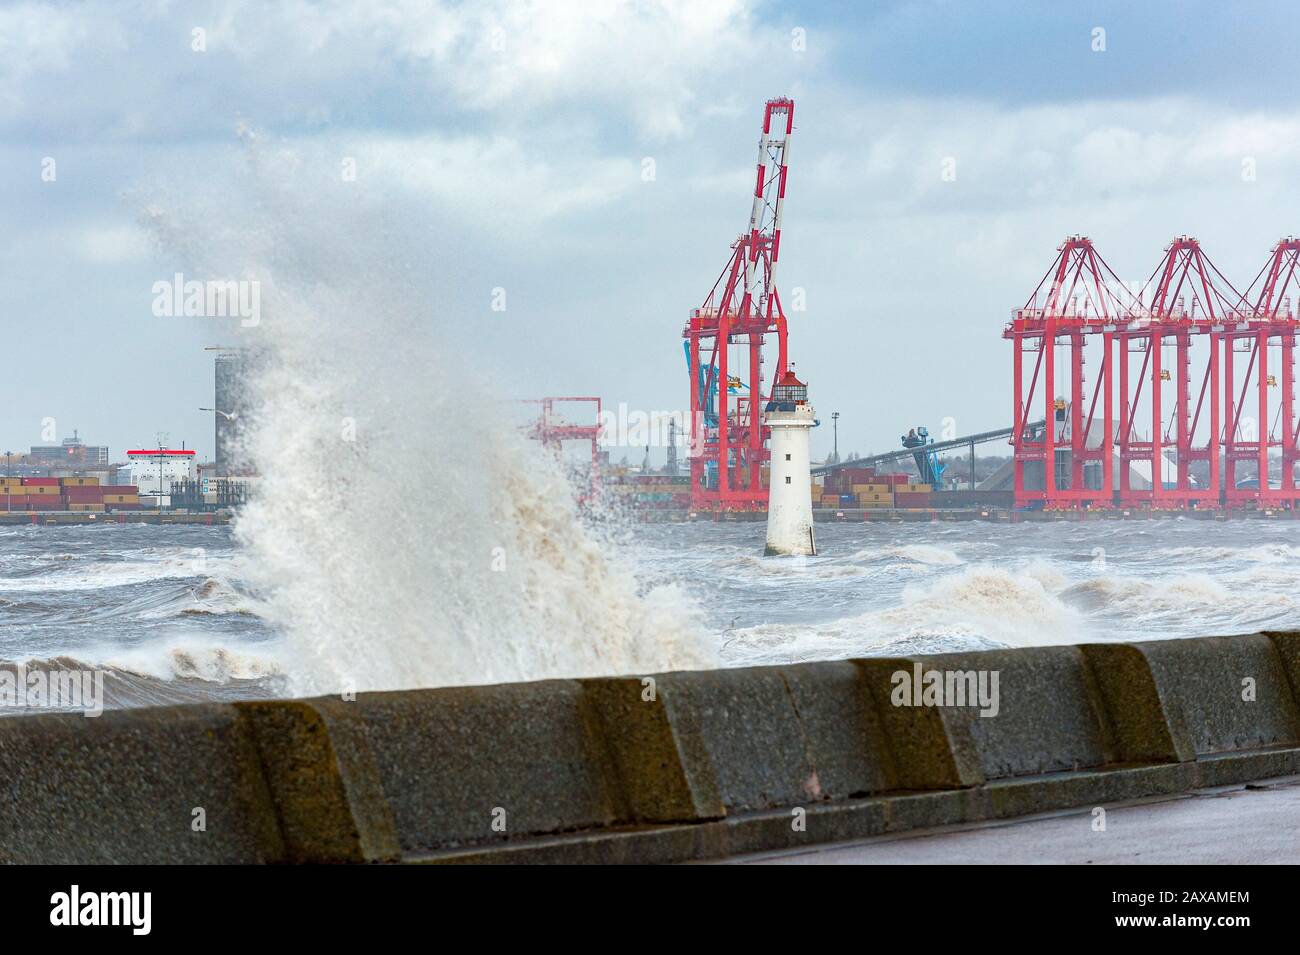 New Brighton, Wirral, UK. 11th February 2020. Strong waves in the aftermath of Storm Ciara continues to hit New Brighton, on the Wirral peninsula.  With strong gale force winds and flooding, the cleanup operation now begins.  Credit: Paul Warburton/Alamy Live News Stock Photo